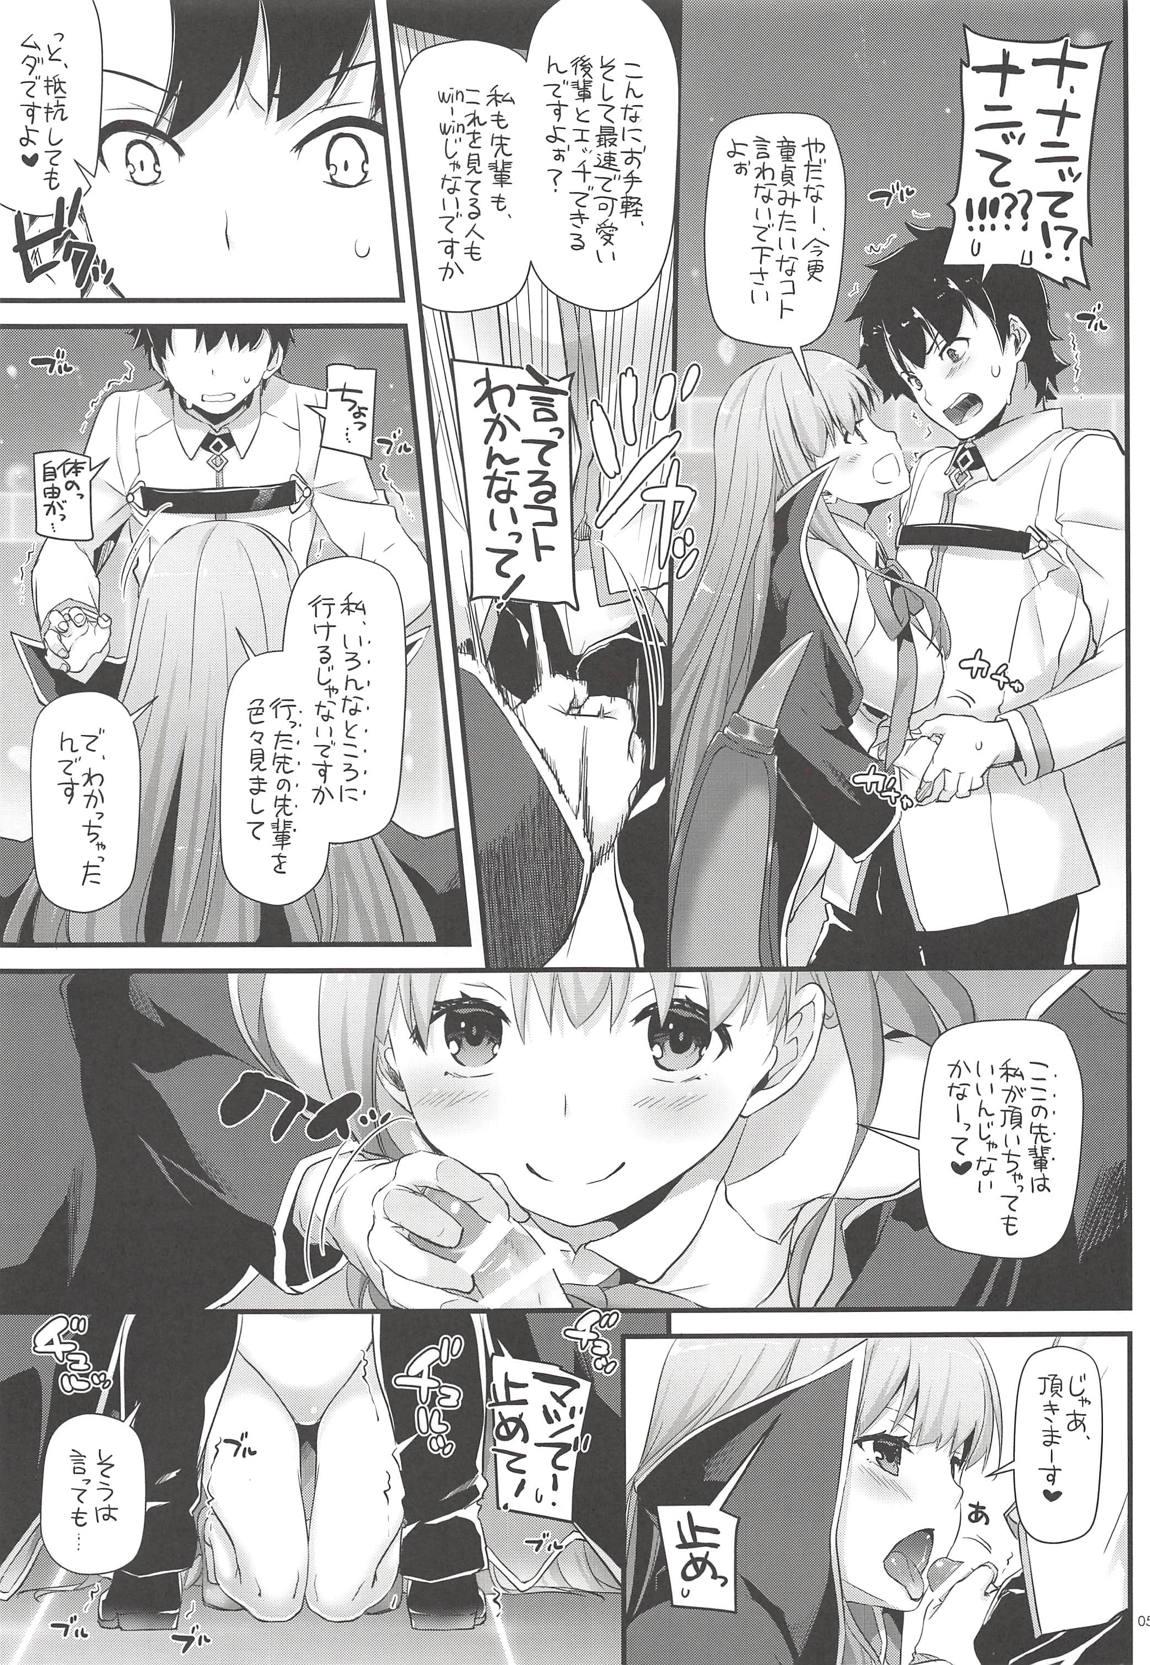 Bra D.L. action 124 - Fate grand order Large - Page 4